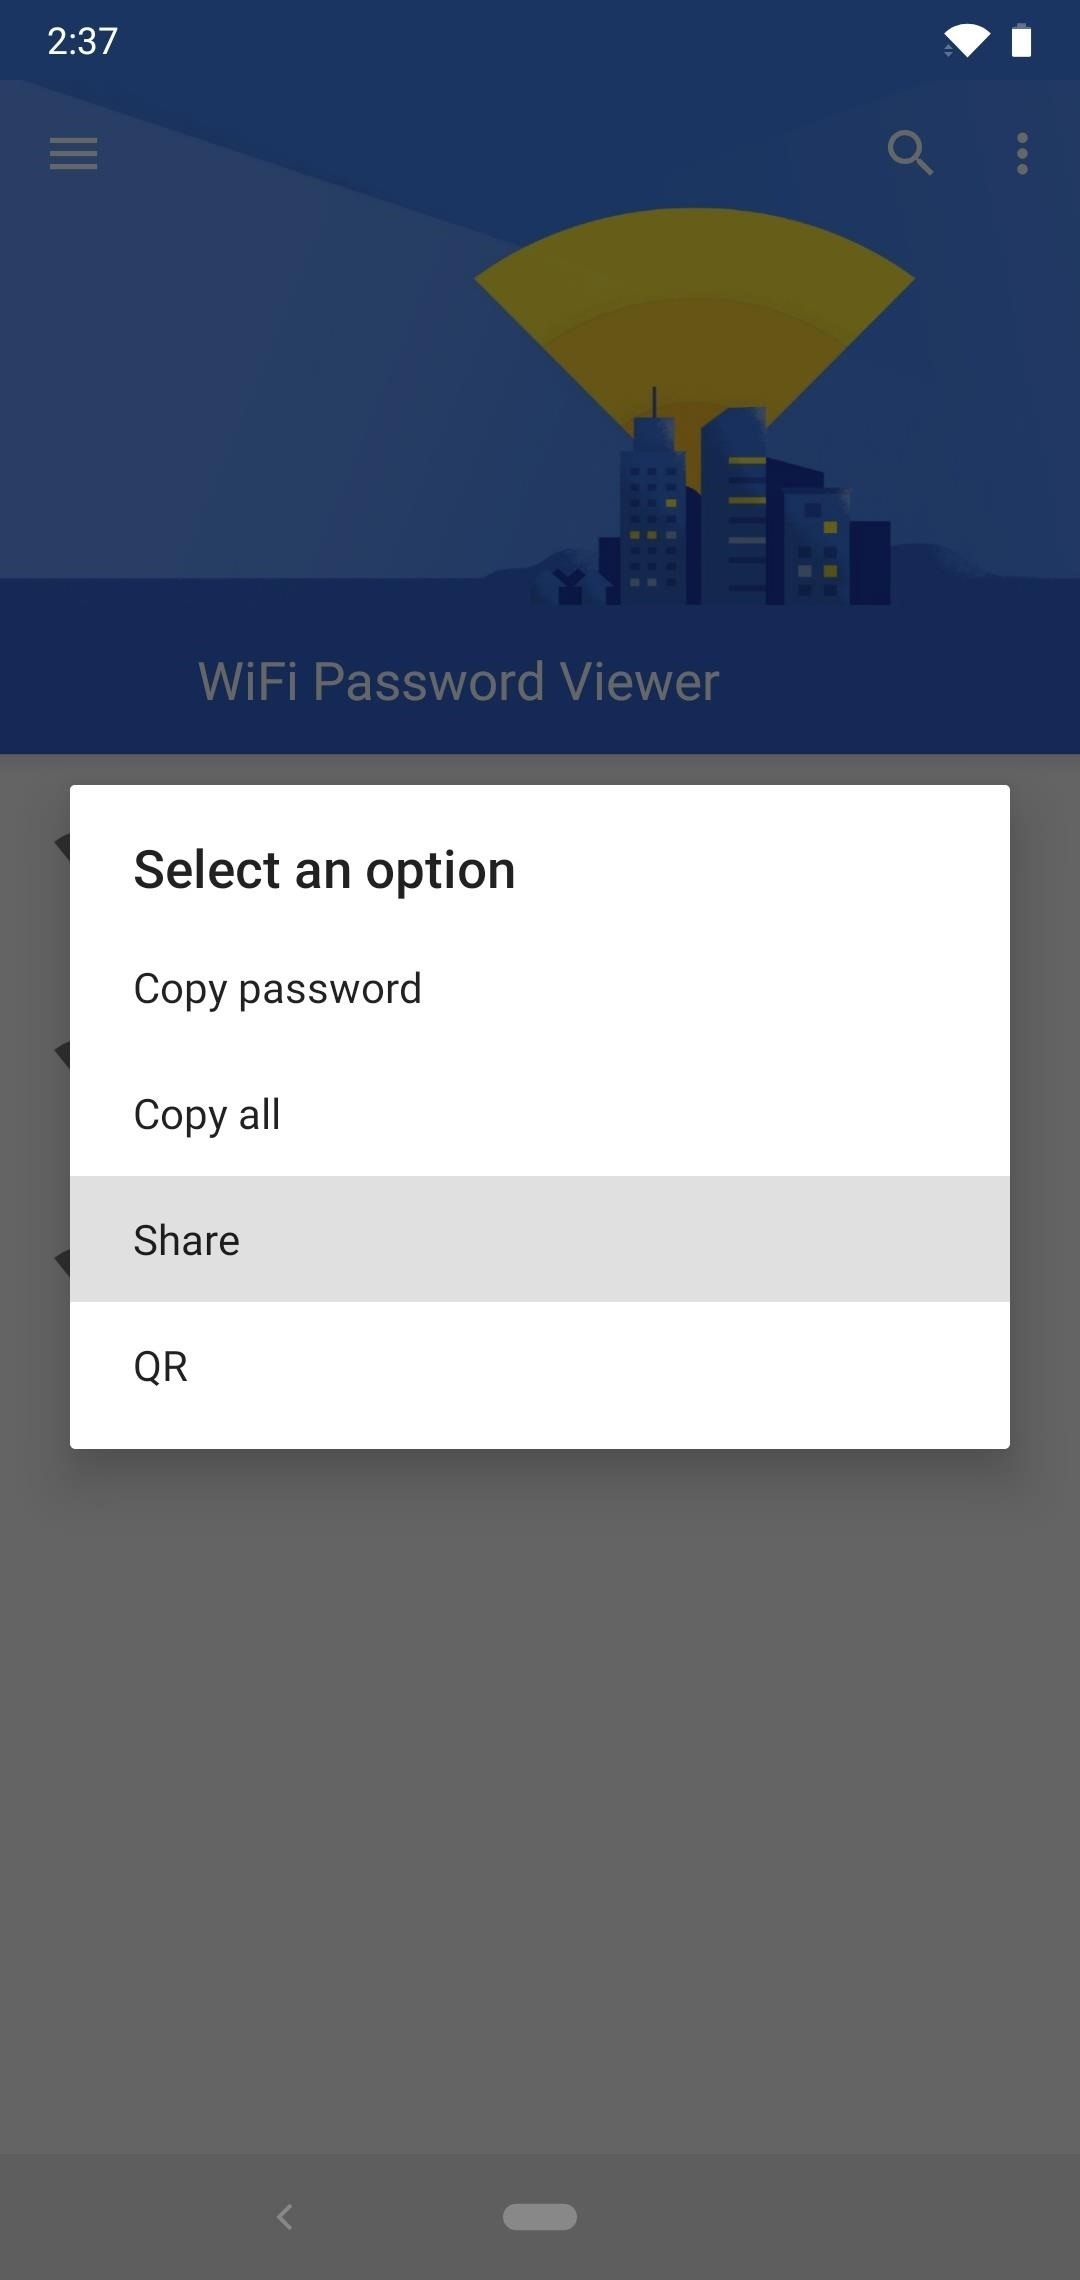 https://img.gadgethacks.com/img/19/49/63700268926092/0/see-passwords-for-wi-fi-networks-youve-connected-your-android-device.w1456.jpg